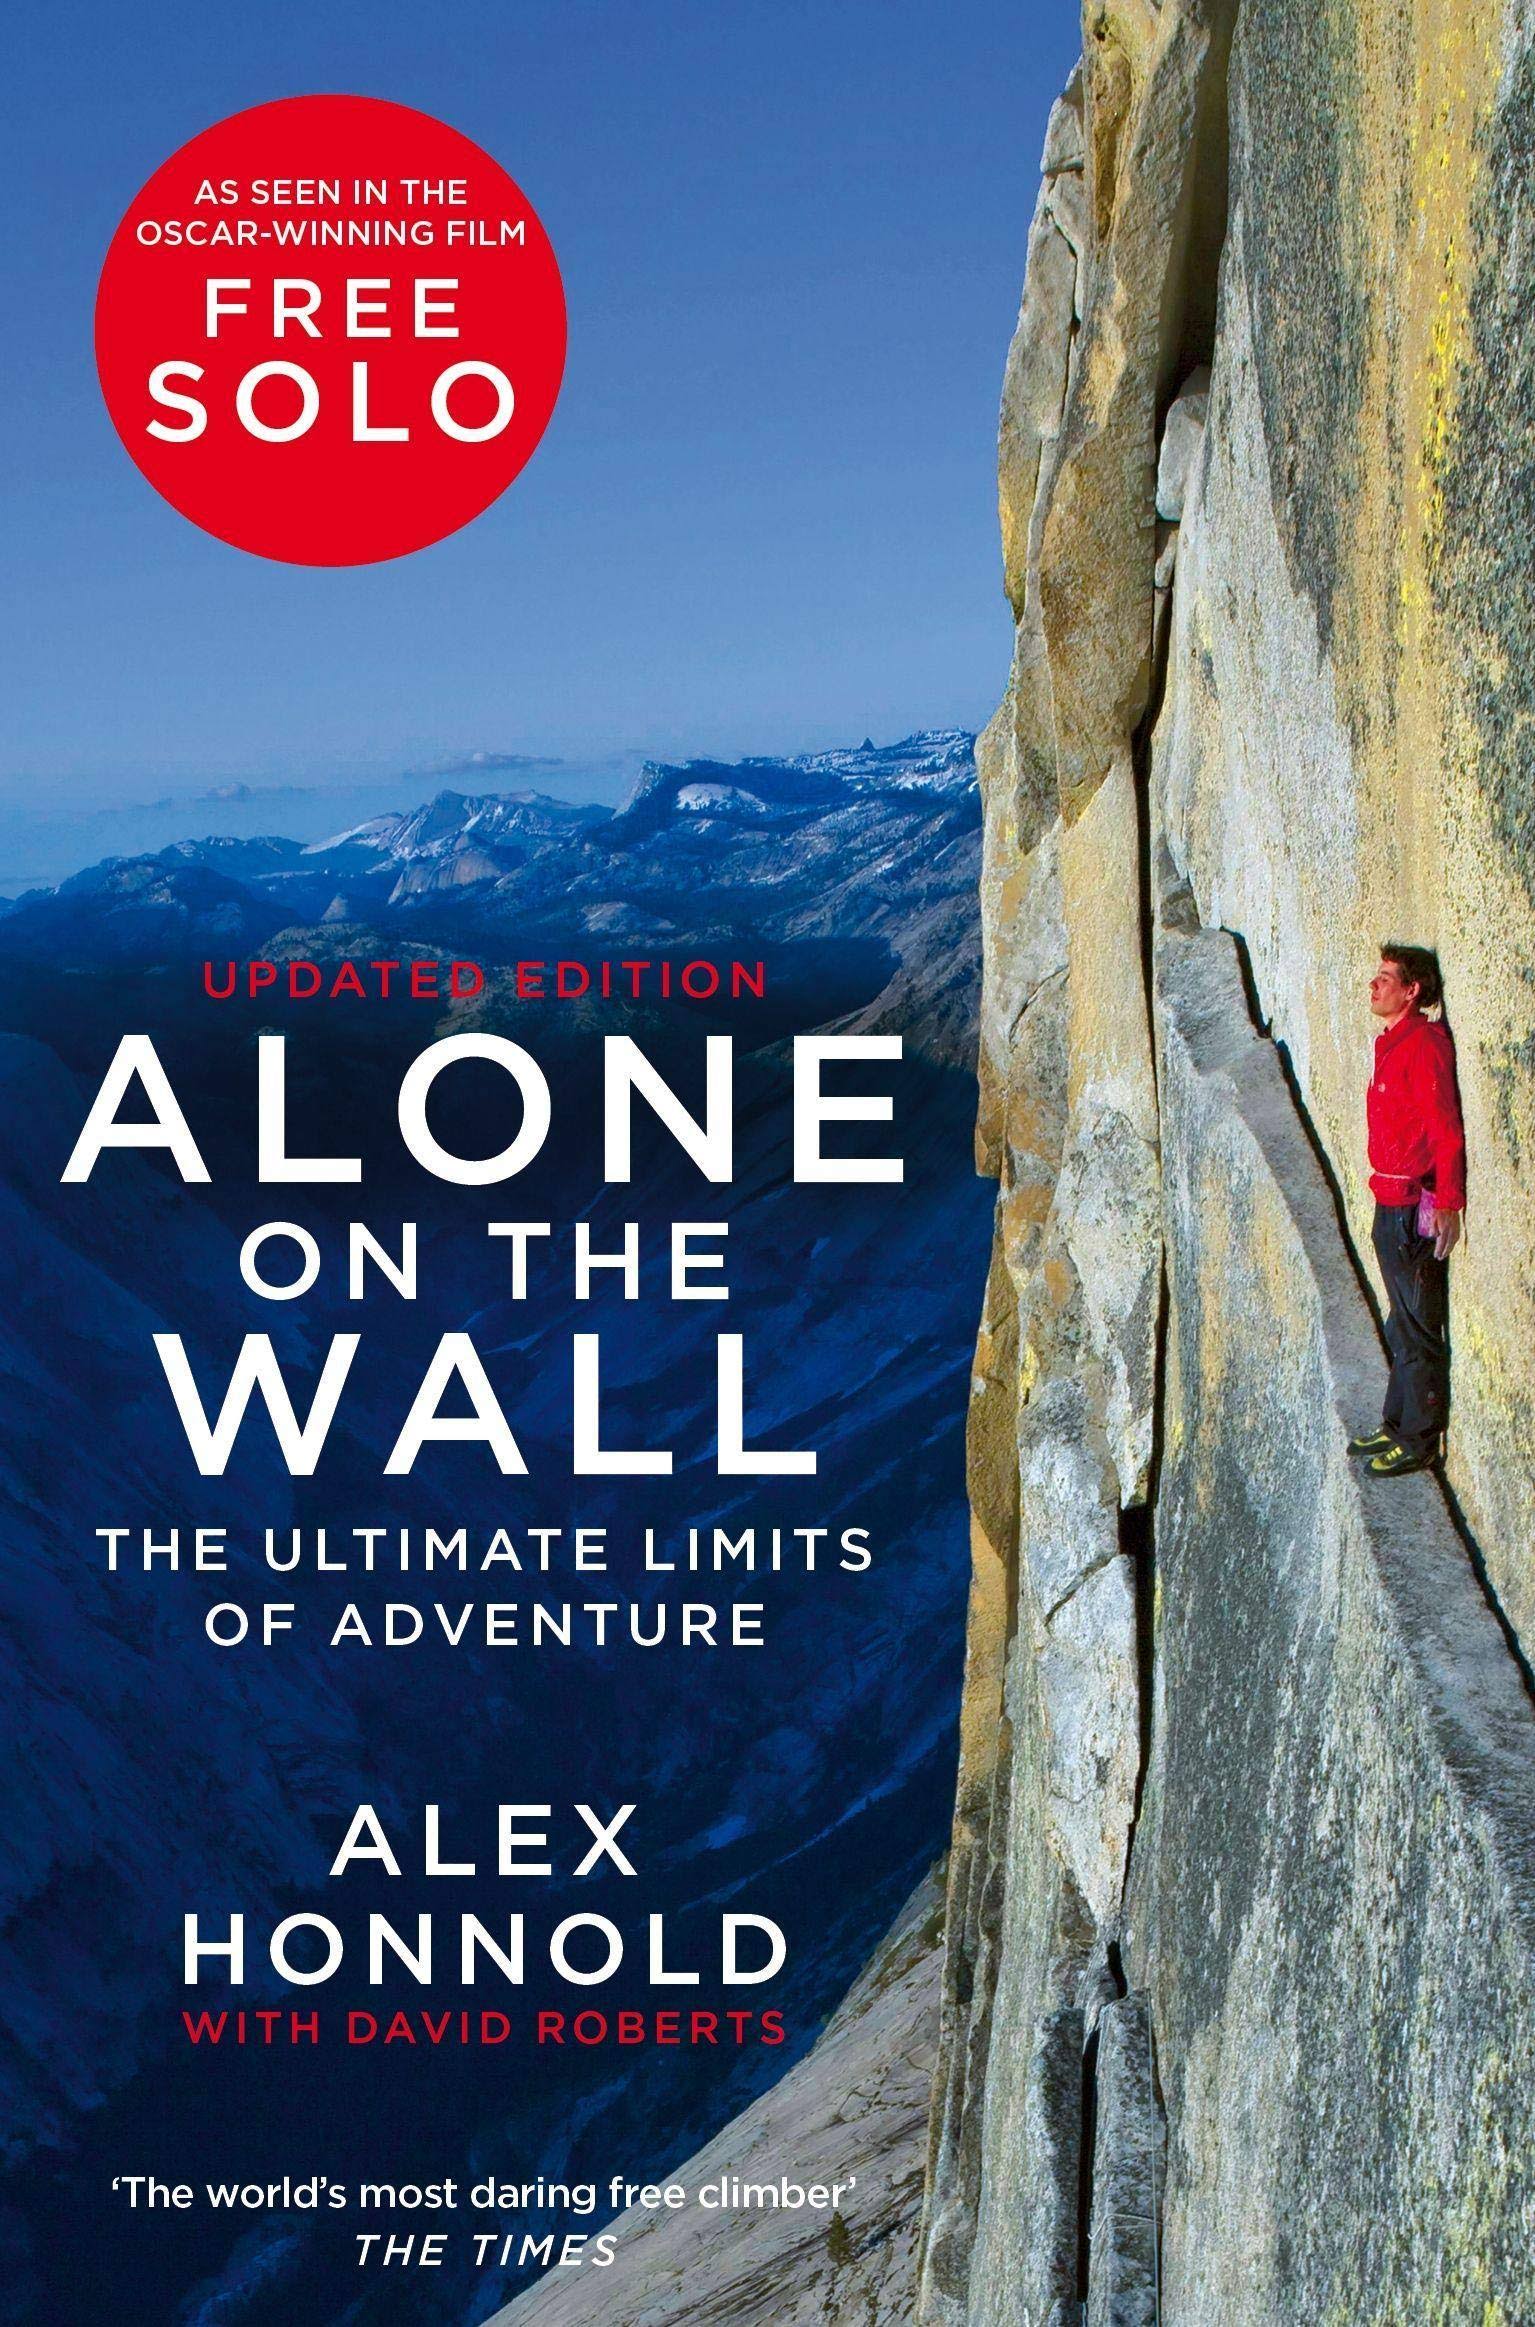 Alone On The Wall by Alex Honnold